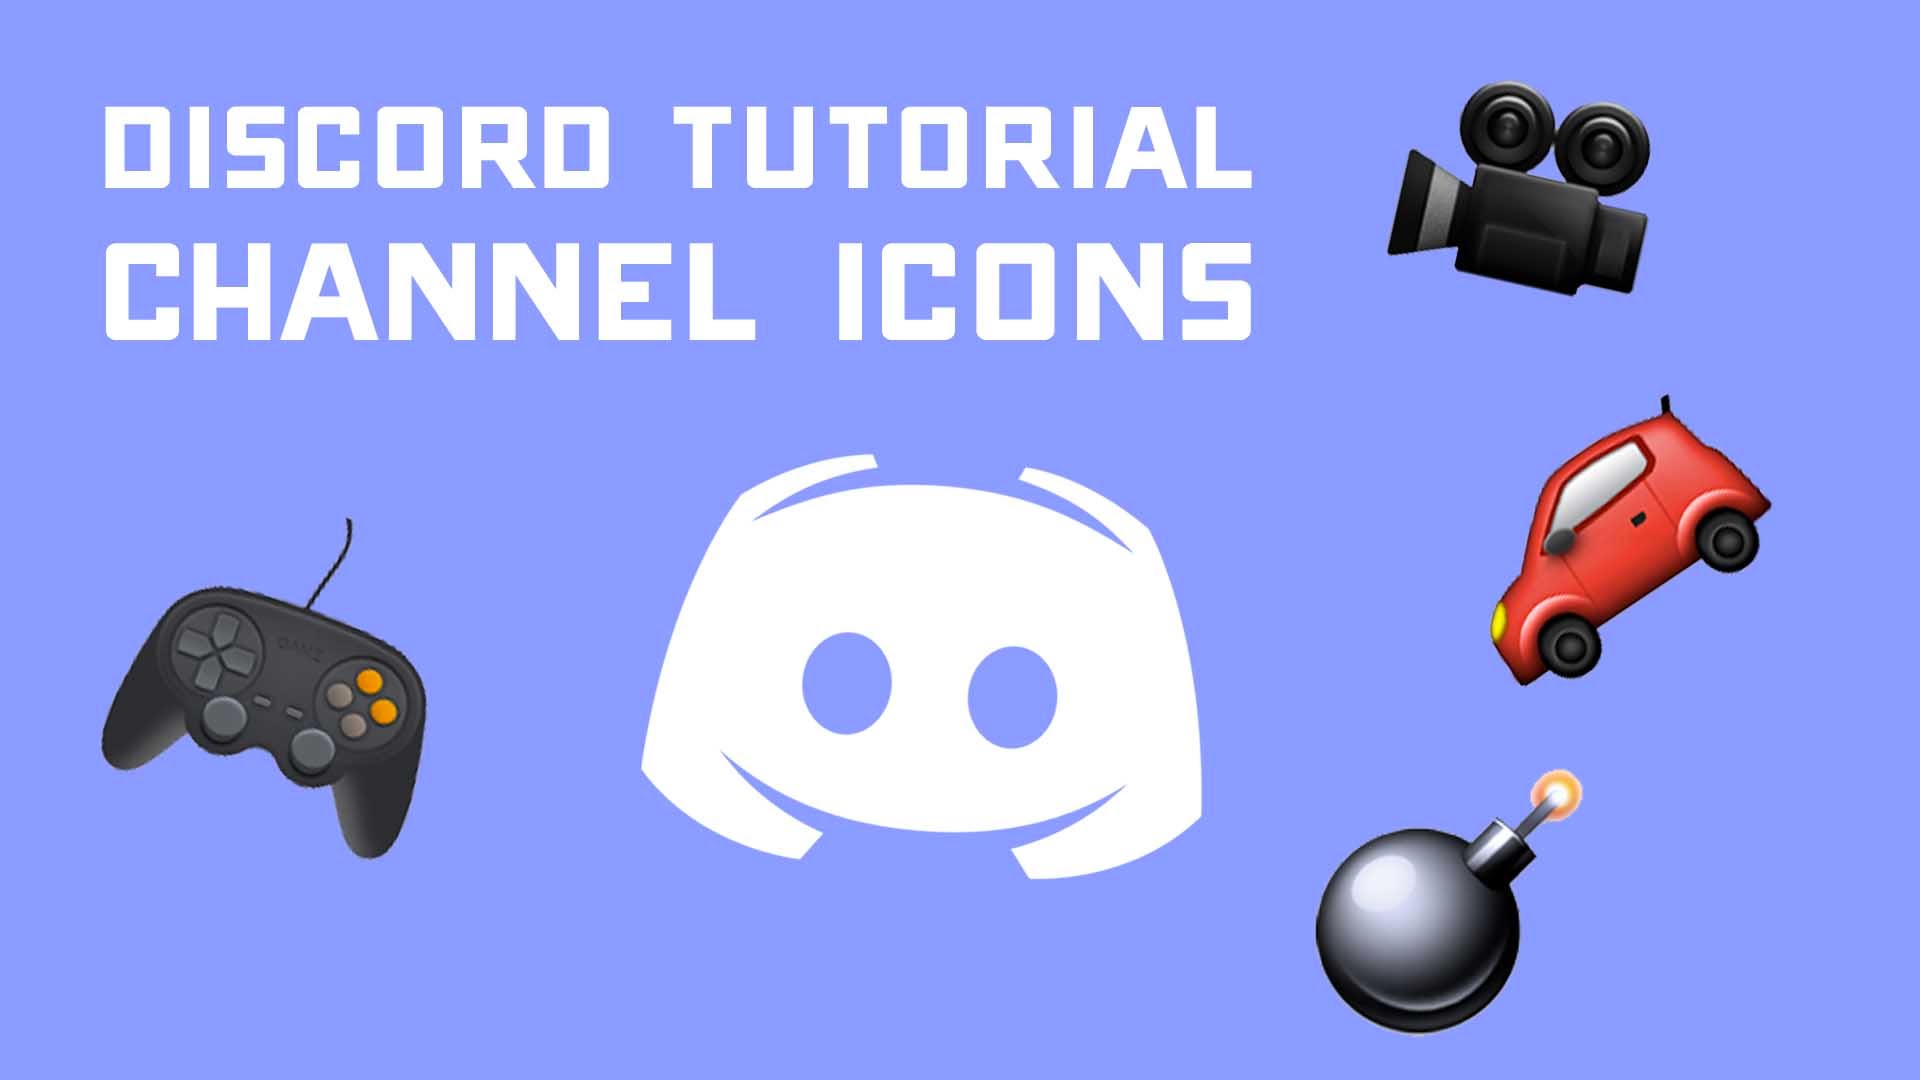 Discord Tutorial - Adding Channel Icons to Your Server via Emojis 